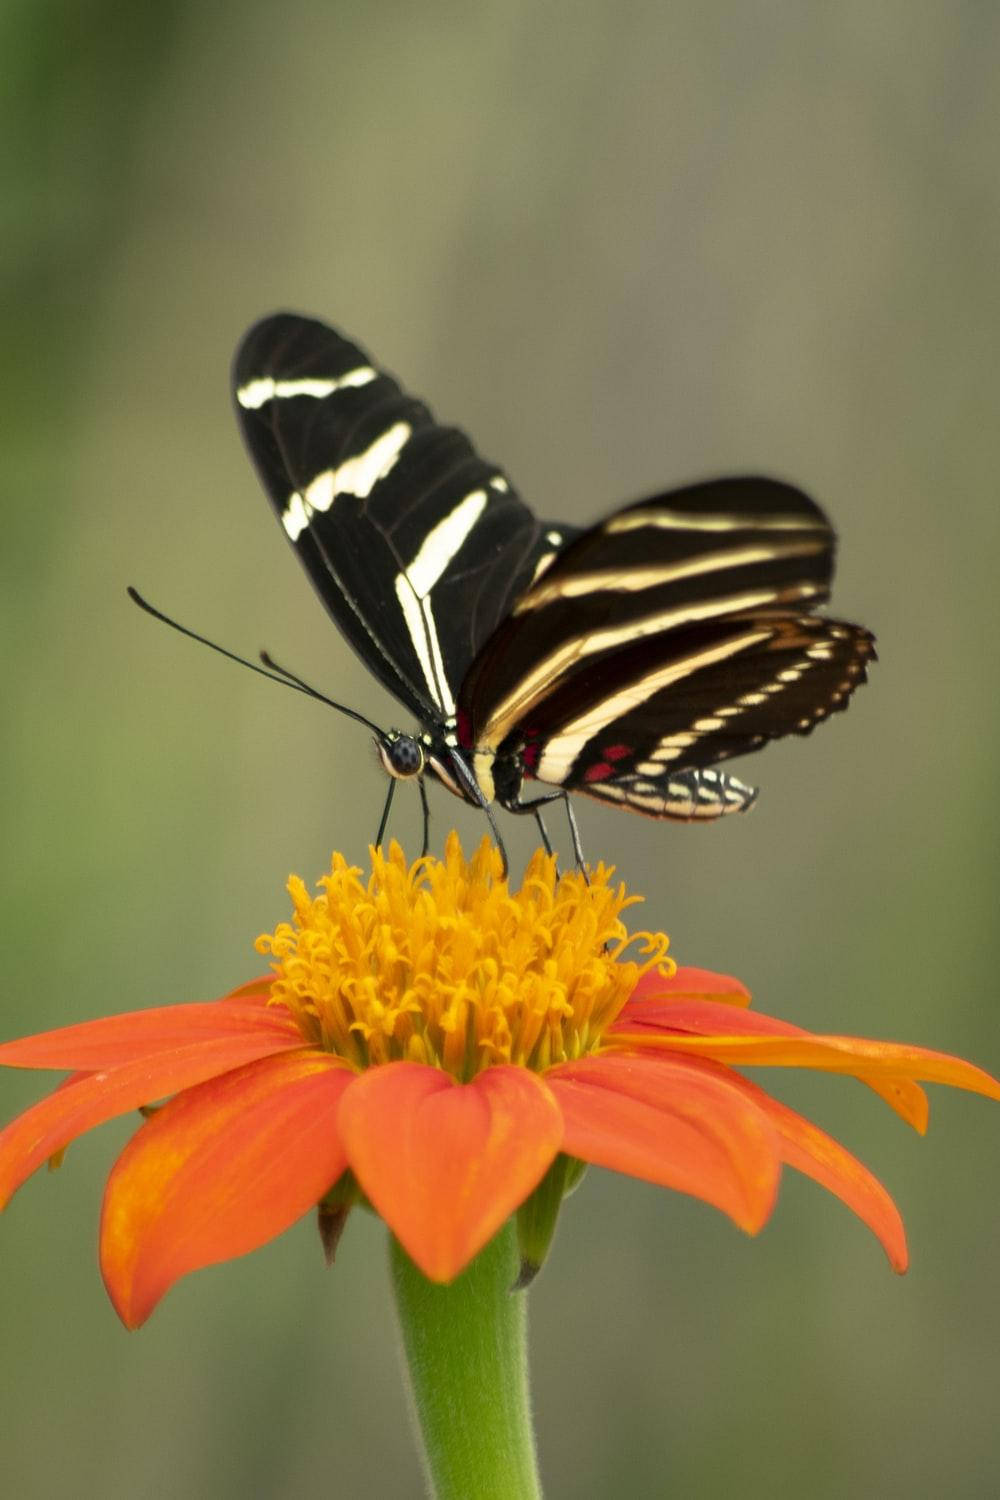 Black Butterfly With Stripes On Flower Wallpaper